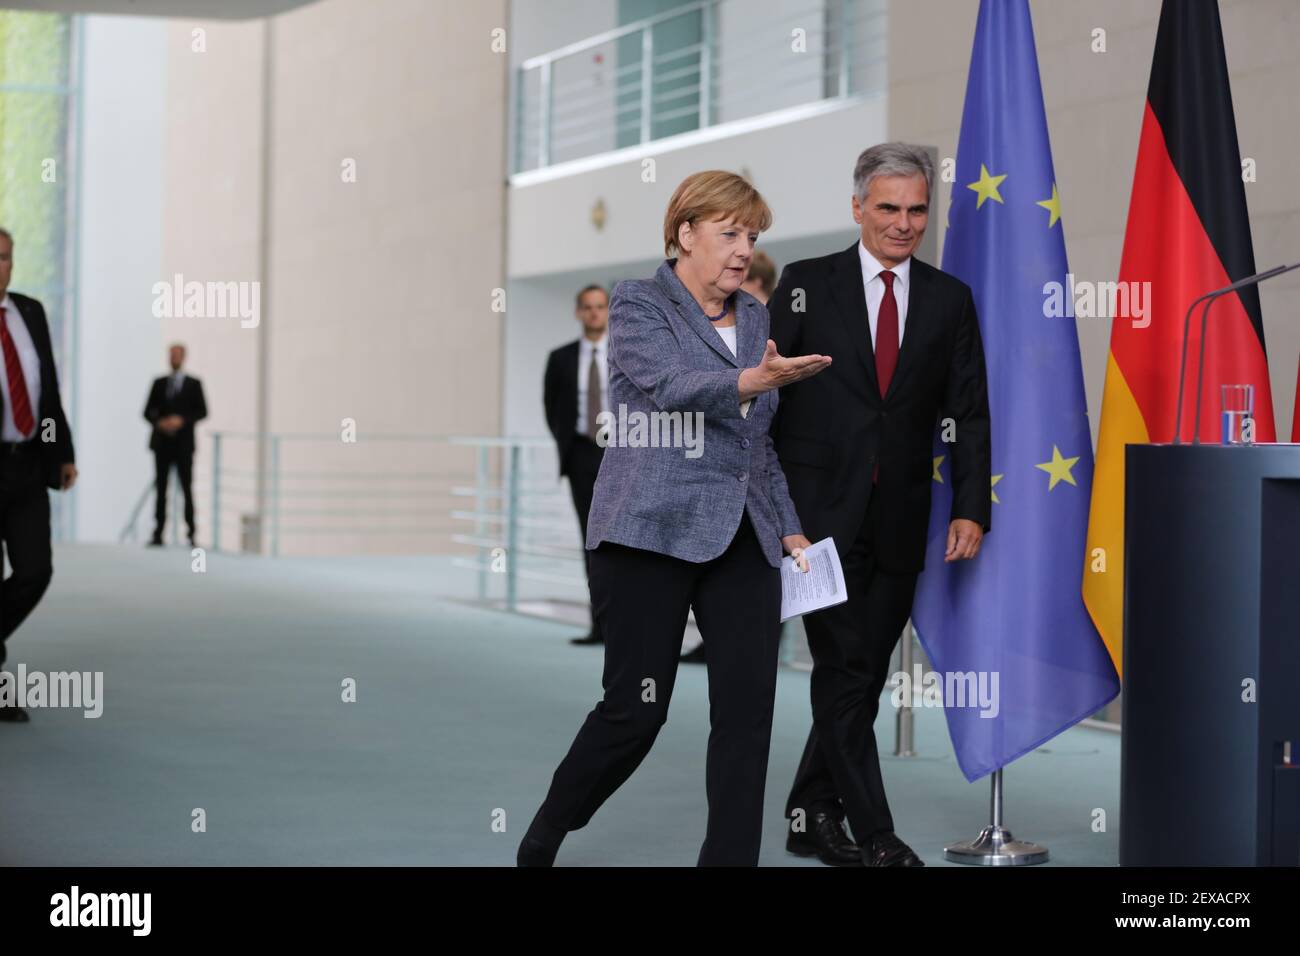 German Chancellor Angela Merkel (left) marched with Austrian Werner Faymann (right) during a joint press conference at the Federal Chancellery. (Photo by Simone Kuhlmey / Pacific Press) *** Please Use Credit from Credit Field *** Stock Photo